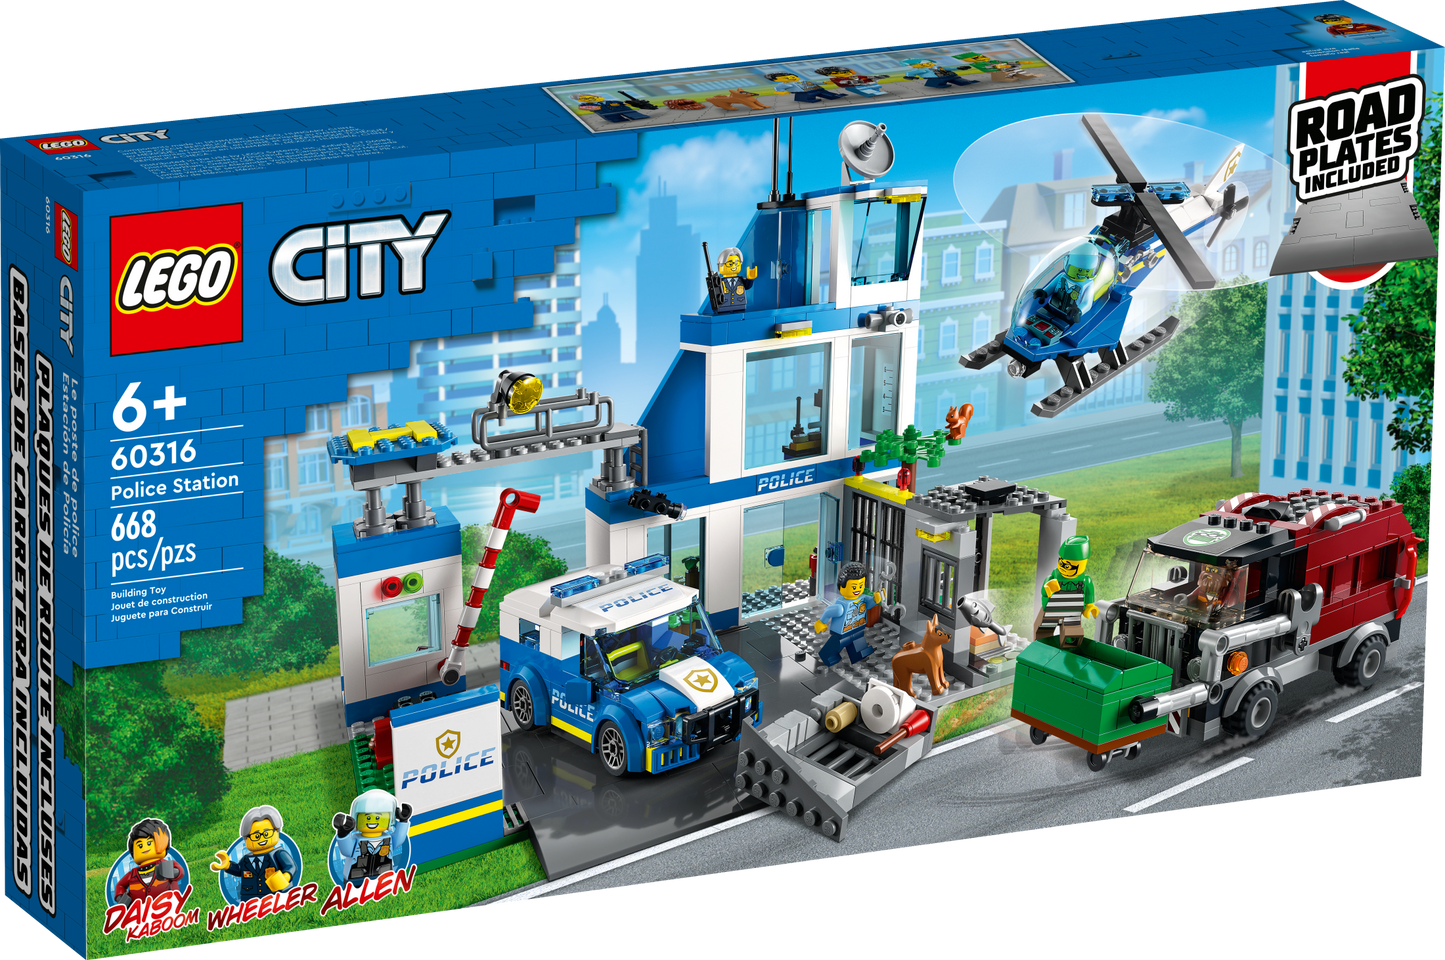 City Police Station with Van, Garbage Truck & Helicopter Toy 60316, Gifts for 6 plus Year Old Kids, Boys & Girls with 5 Minifigures and Dog Toy